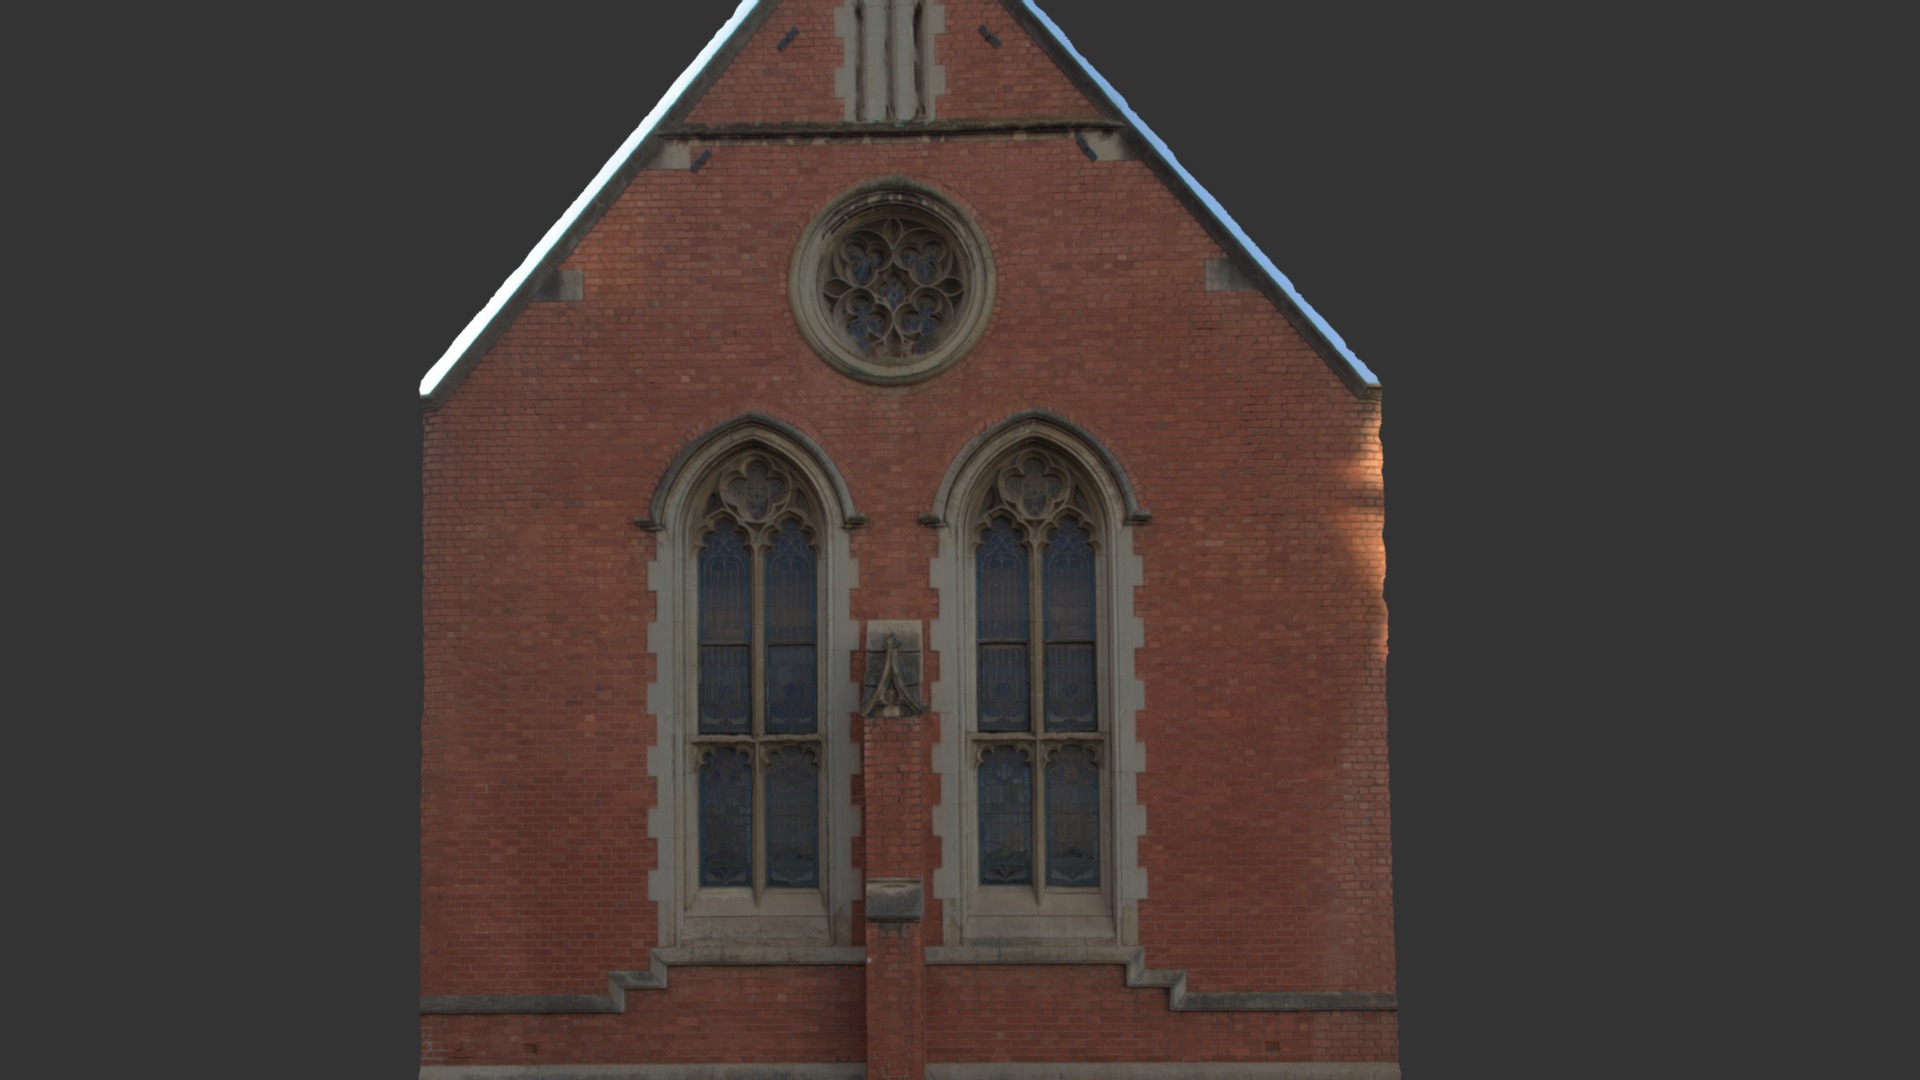 3D model Church Facade - This is a 3D model of the Church Facade. The 3D model is about a brick building with a large arched window.